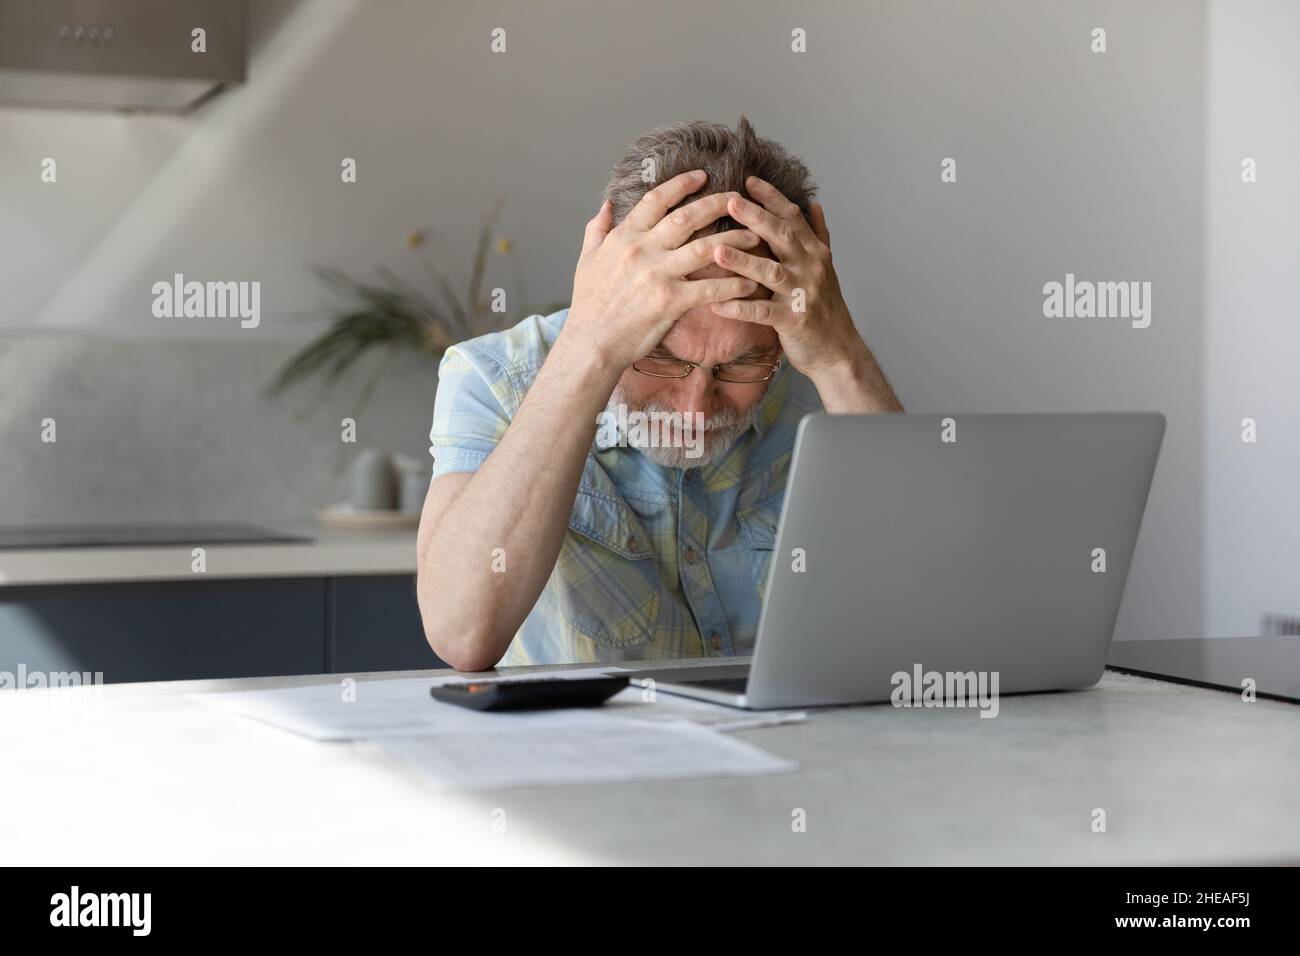 Unhappy frustrated middle aged man having financial problems. Stock Photo